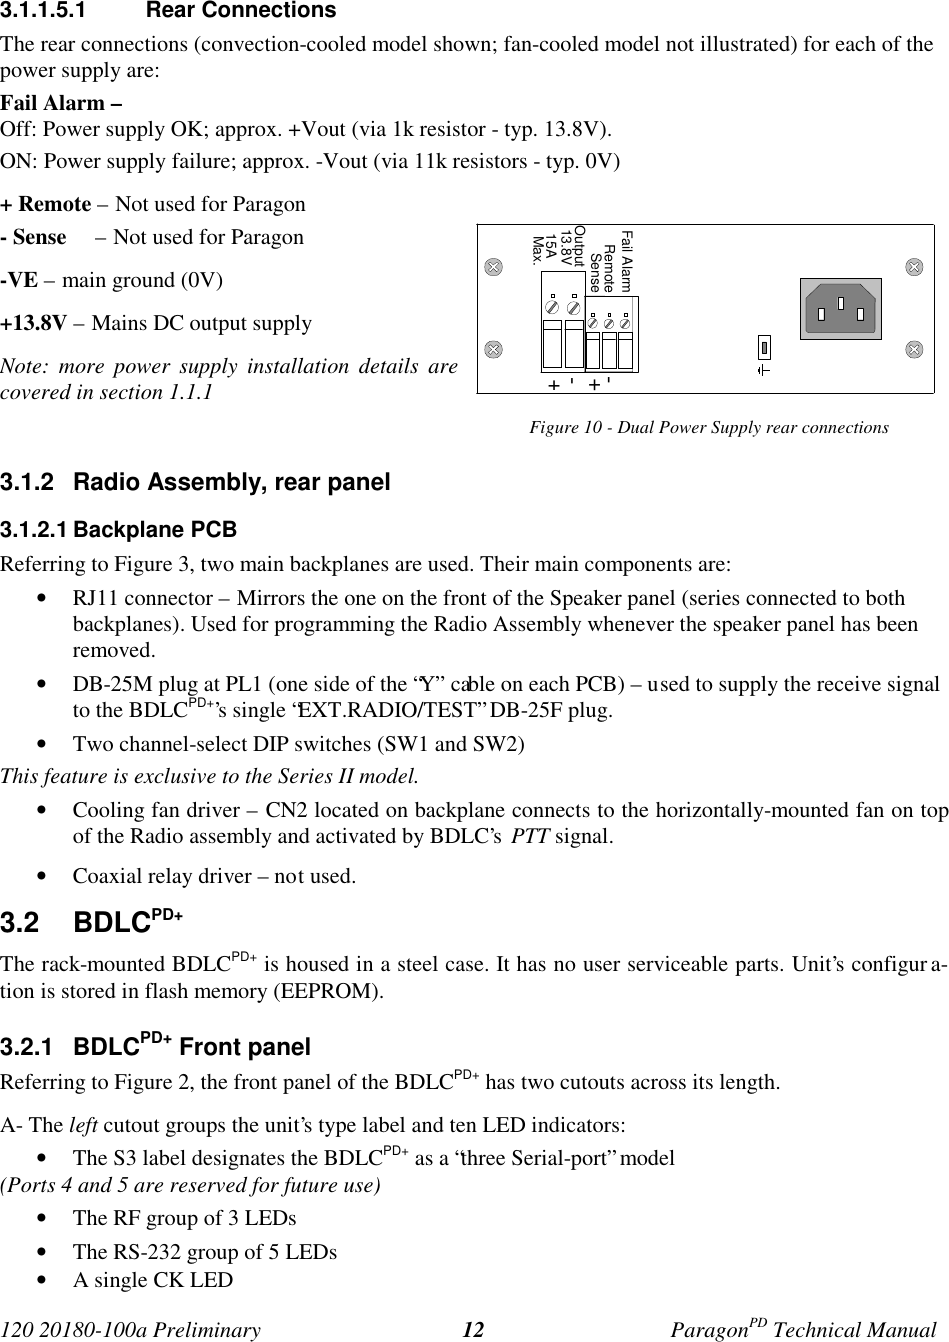 Page 19 of CalAmp Wireless Networks BDD4T85-1 Paragon/PD User Manual Parg PD  T100a Prelim